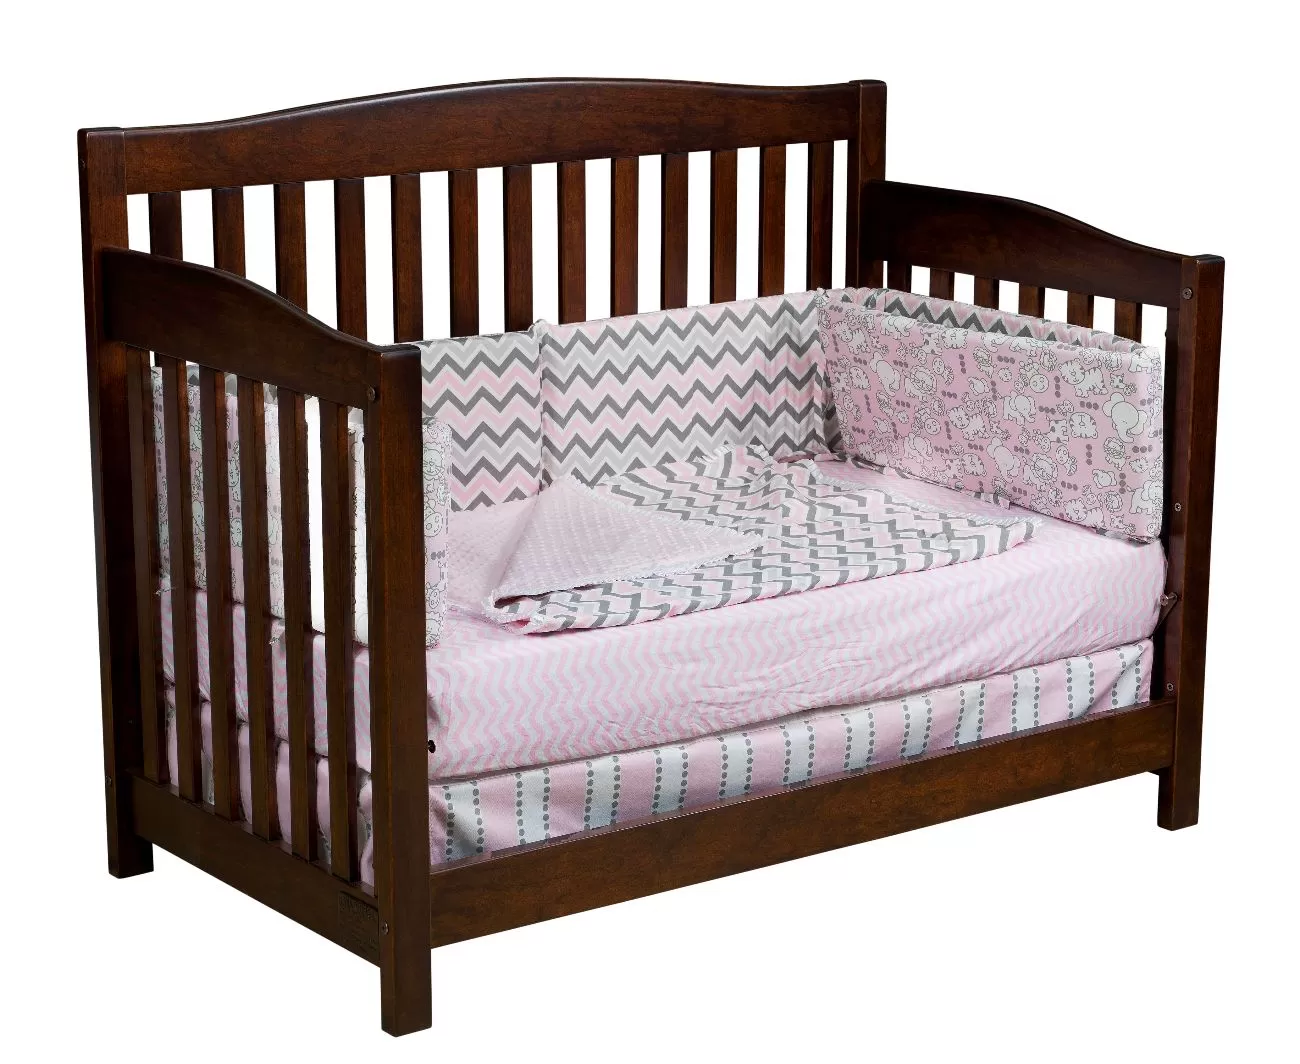 Monterey 501a toddler bed